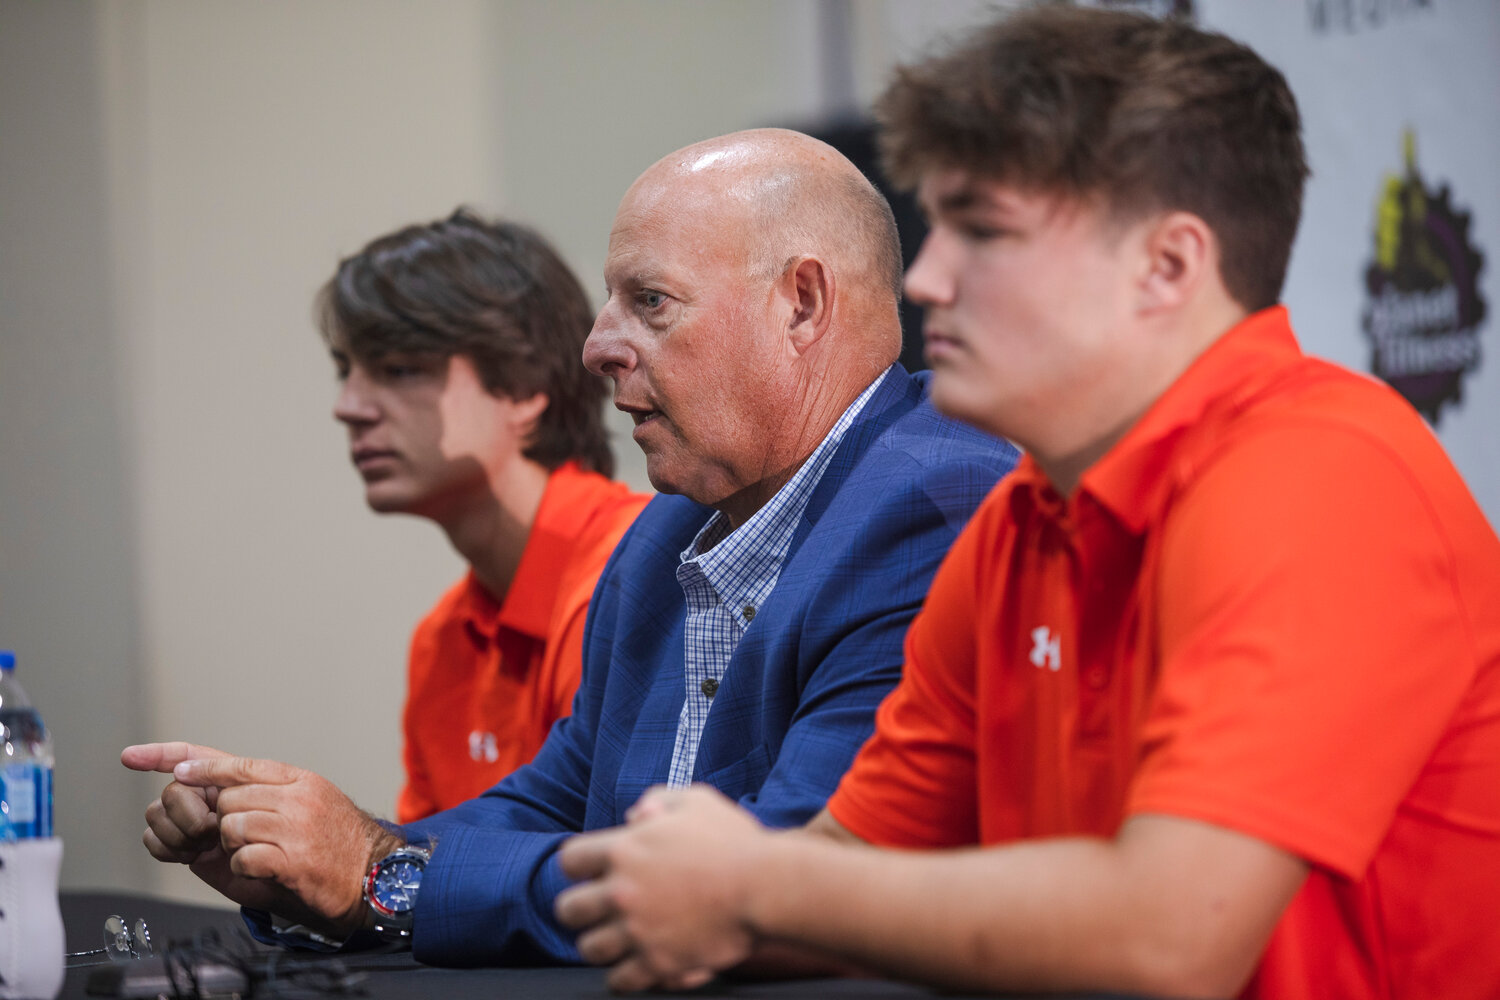 Three-time state champion Jamey DuBose previews the Orange Beach Makos’ 2023 season at the second-annual Gulf Coast Media Day event at The Wharf on July 27. On Friday, Orange Beach’s second head coach stepped down from his post after two seasons.